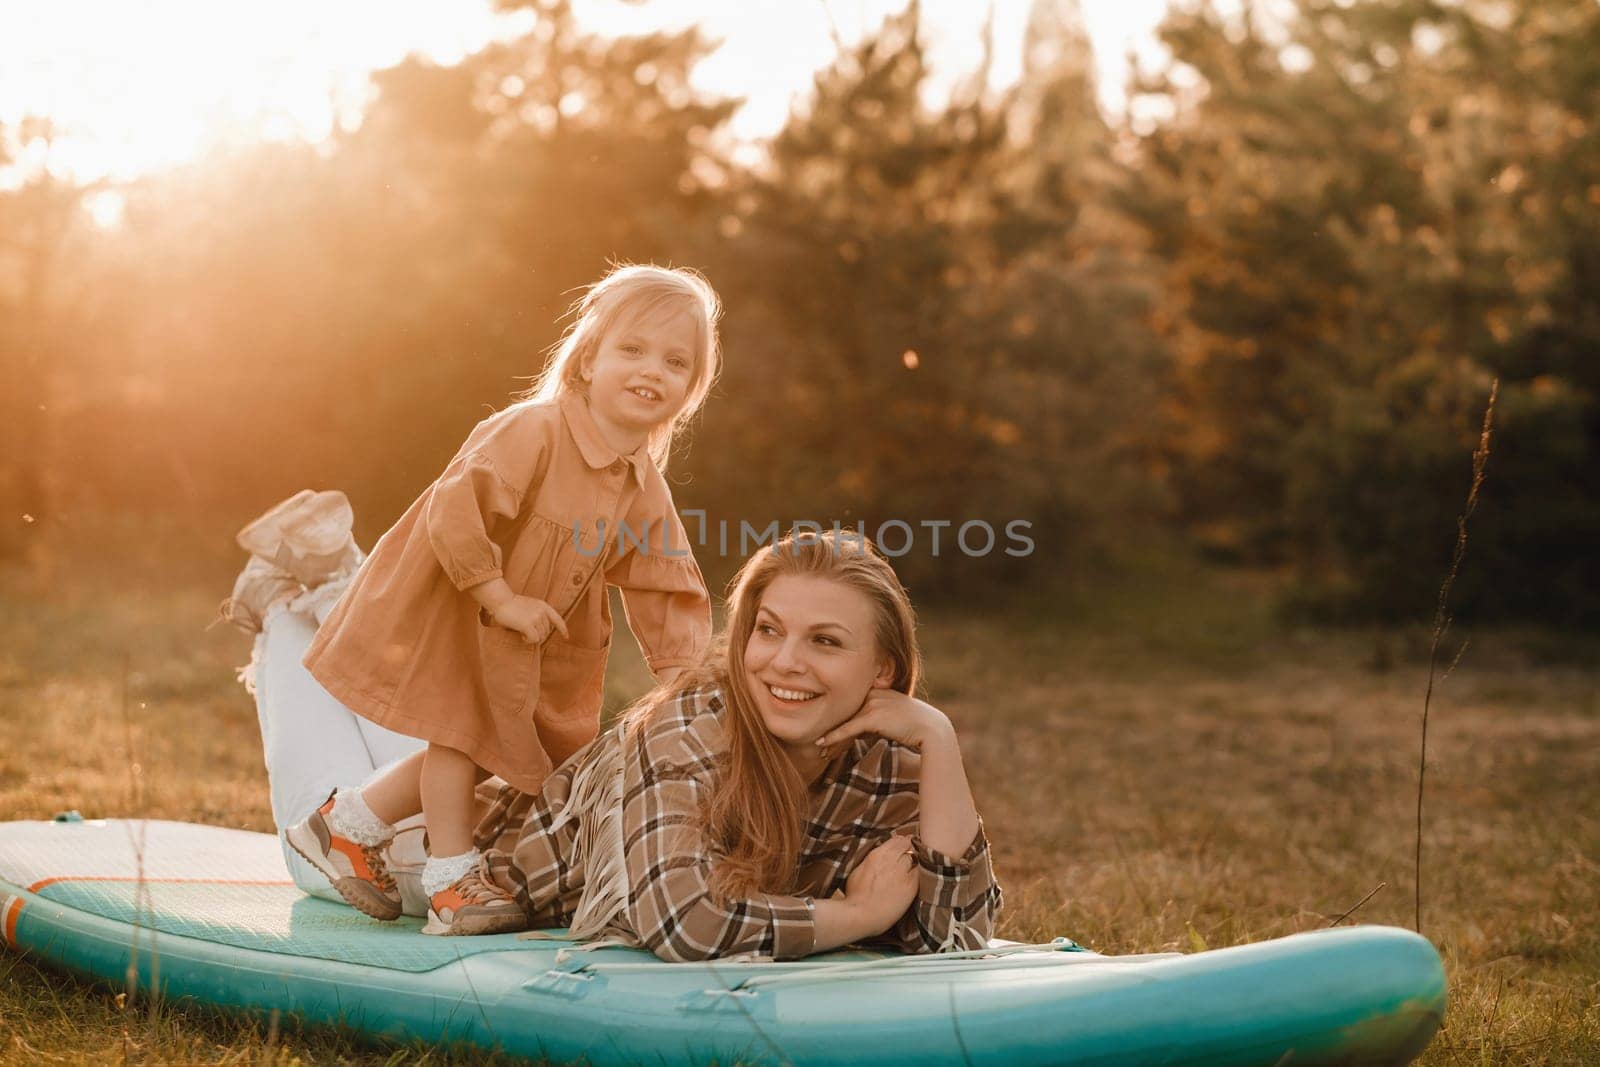 Mom and daughter on a sup board in the forest at sunset.